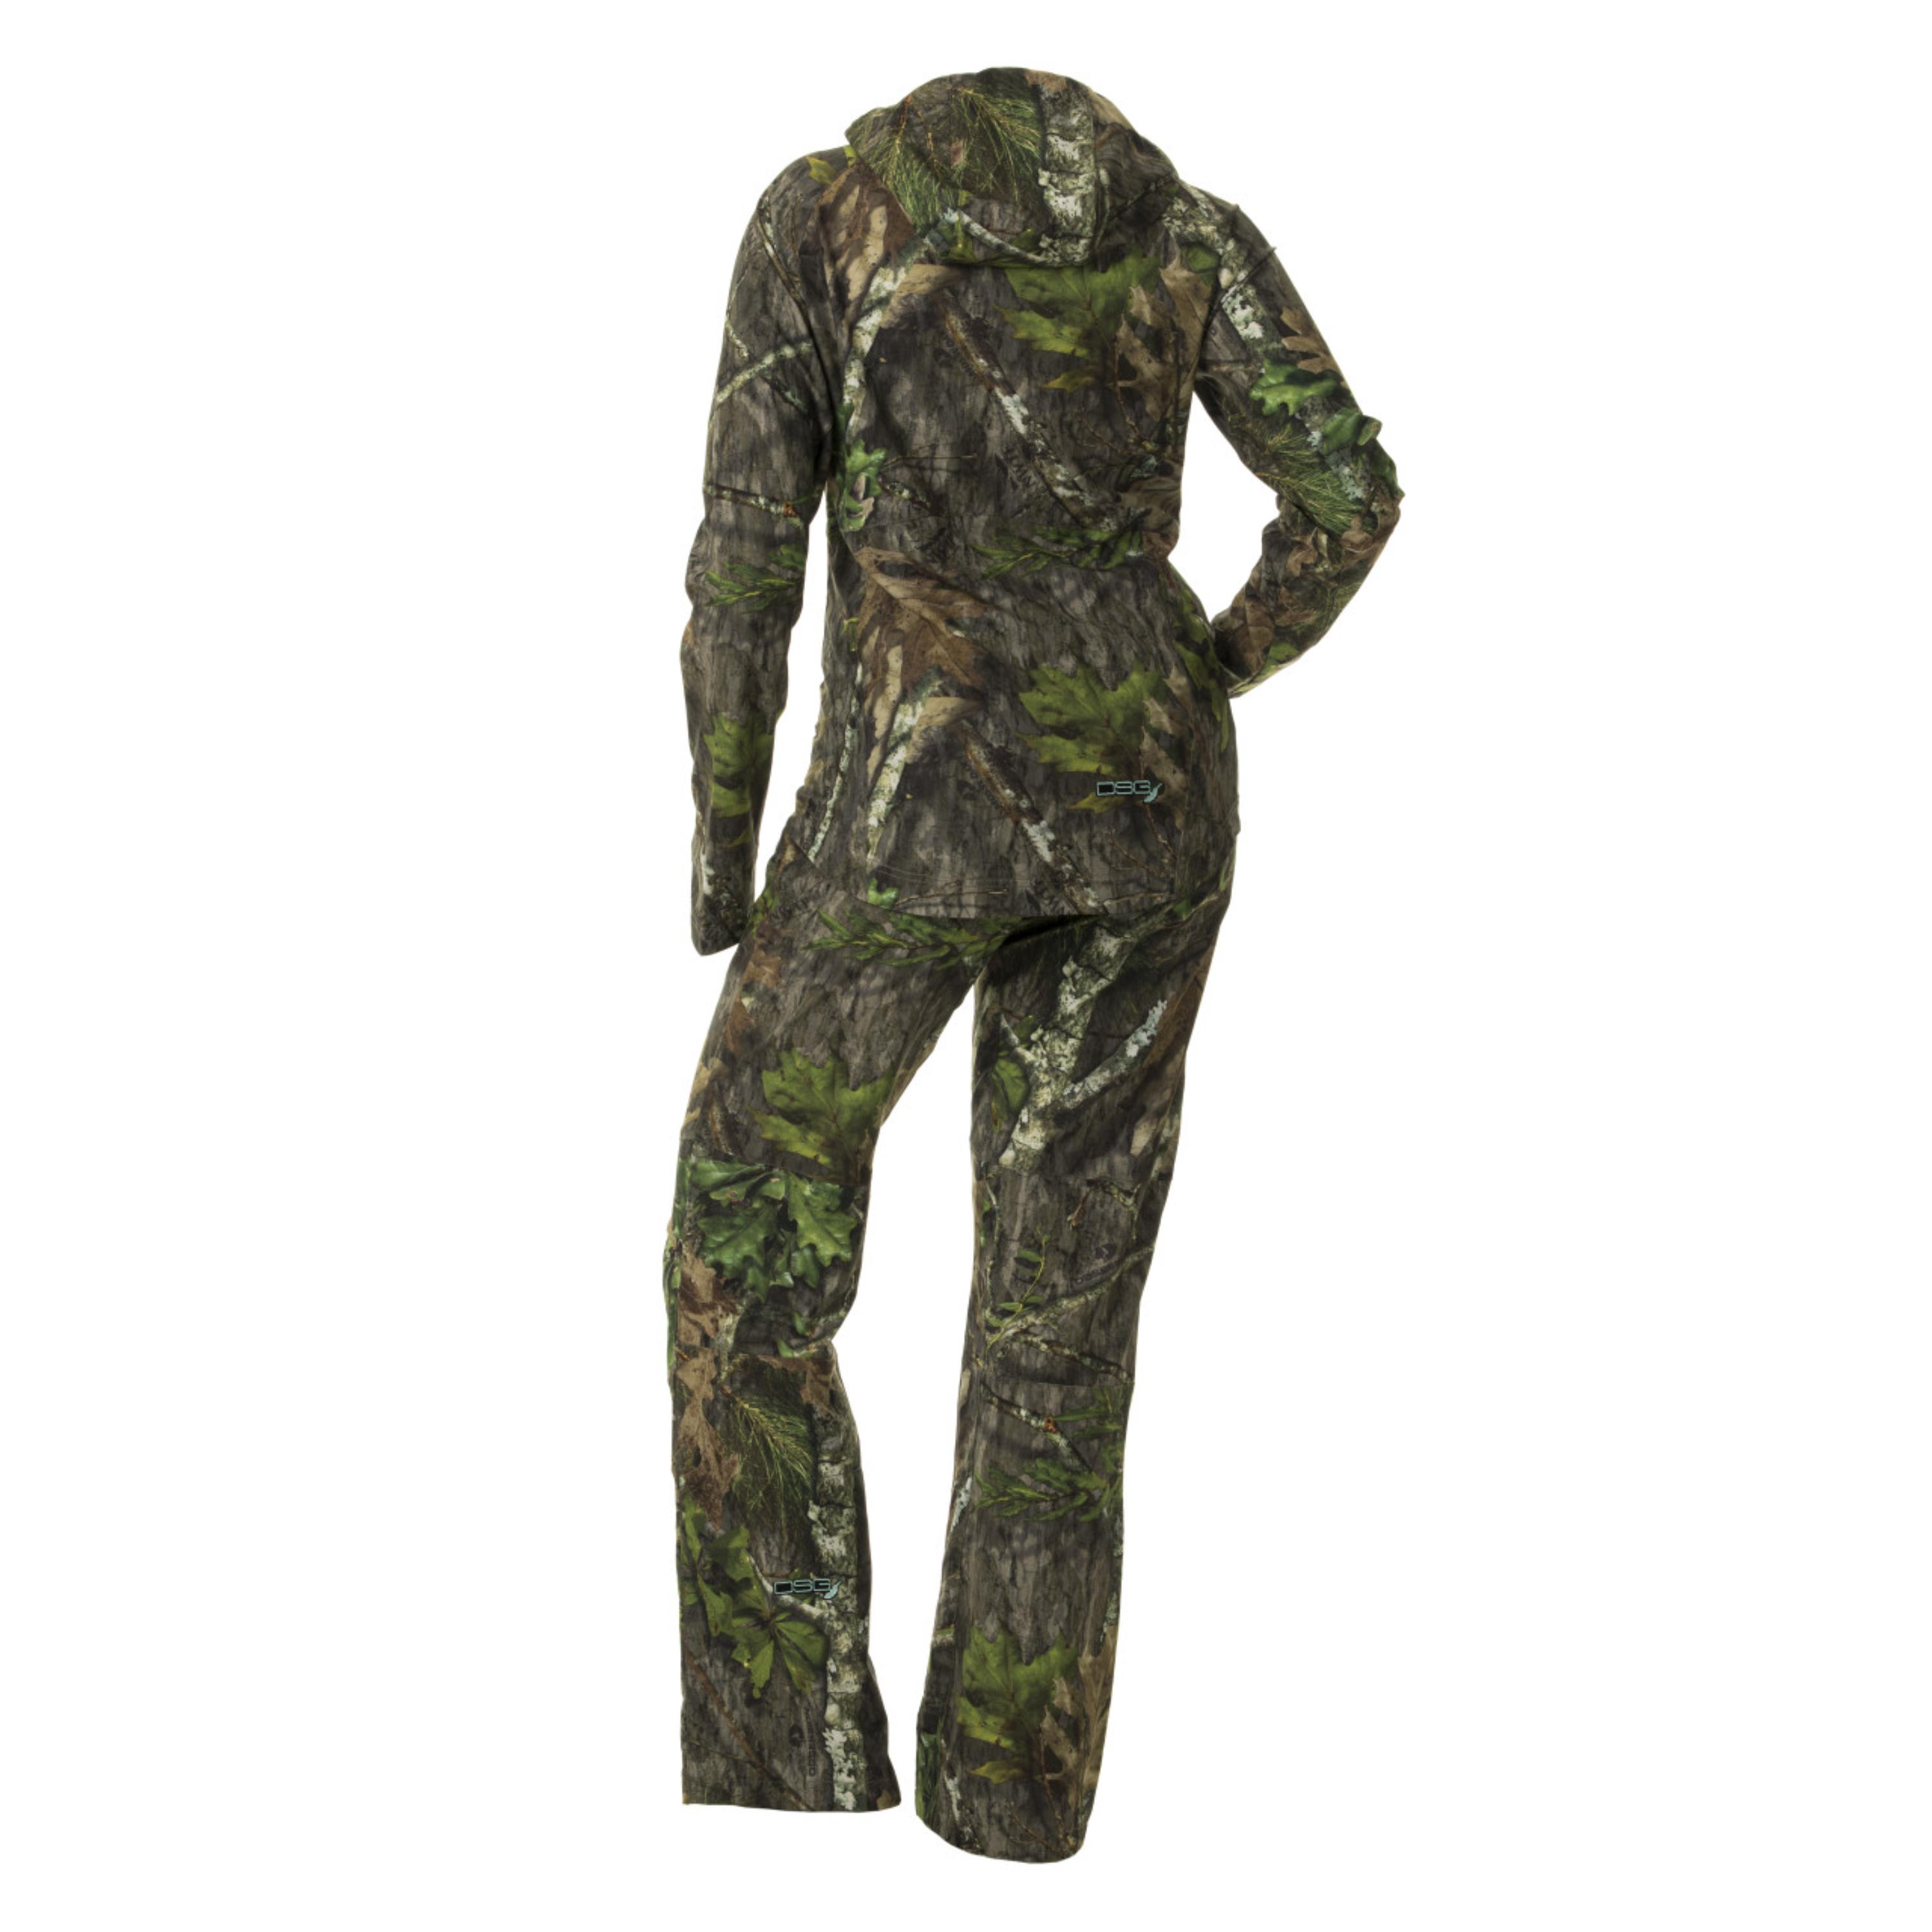 Bexley 2.0 Ripstop Hunting Pant in Mossy Oak Obsession - Large | DSG Outerwear